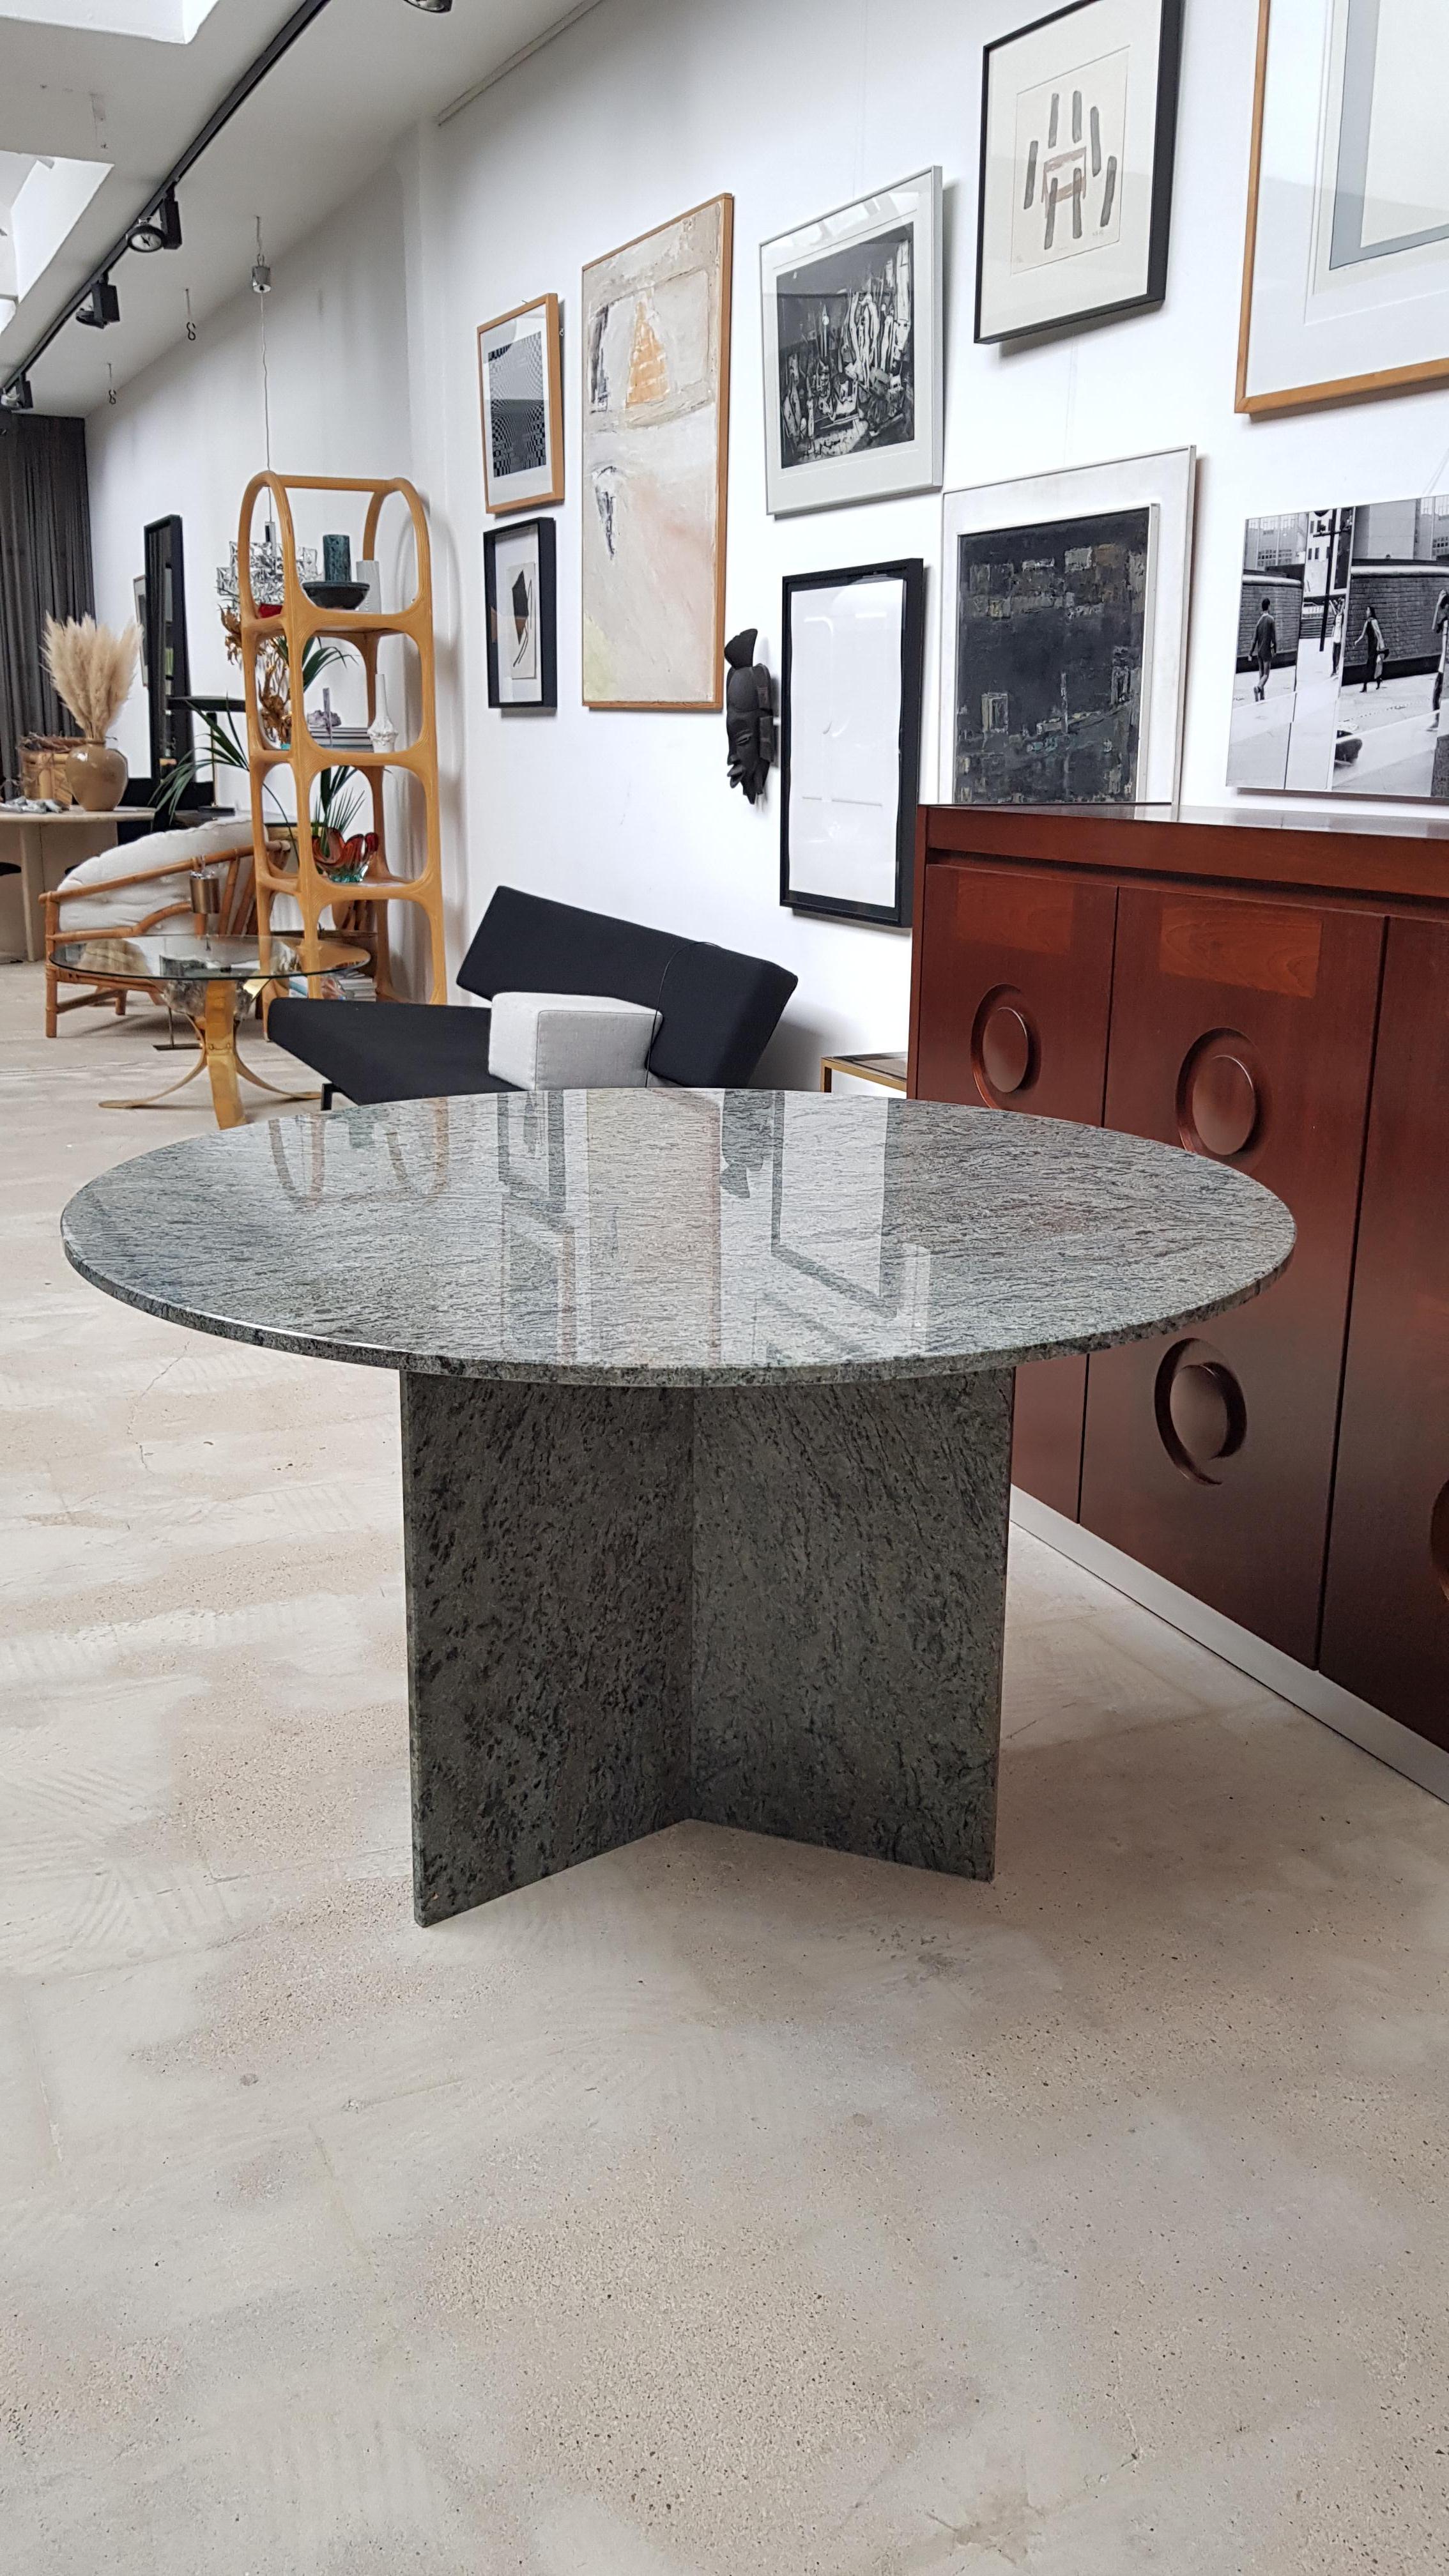 Large midcentury very contemporary dining table with a granite top and base. A mix of green and gray tones. Very good condition.